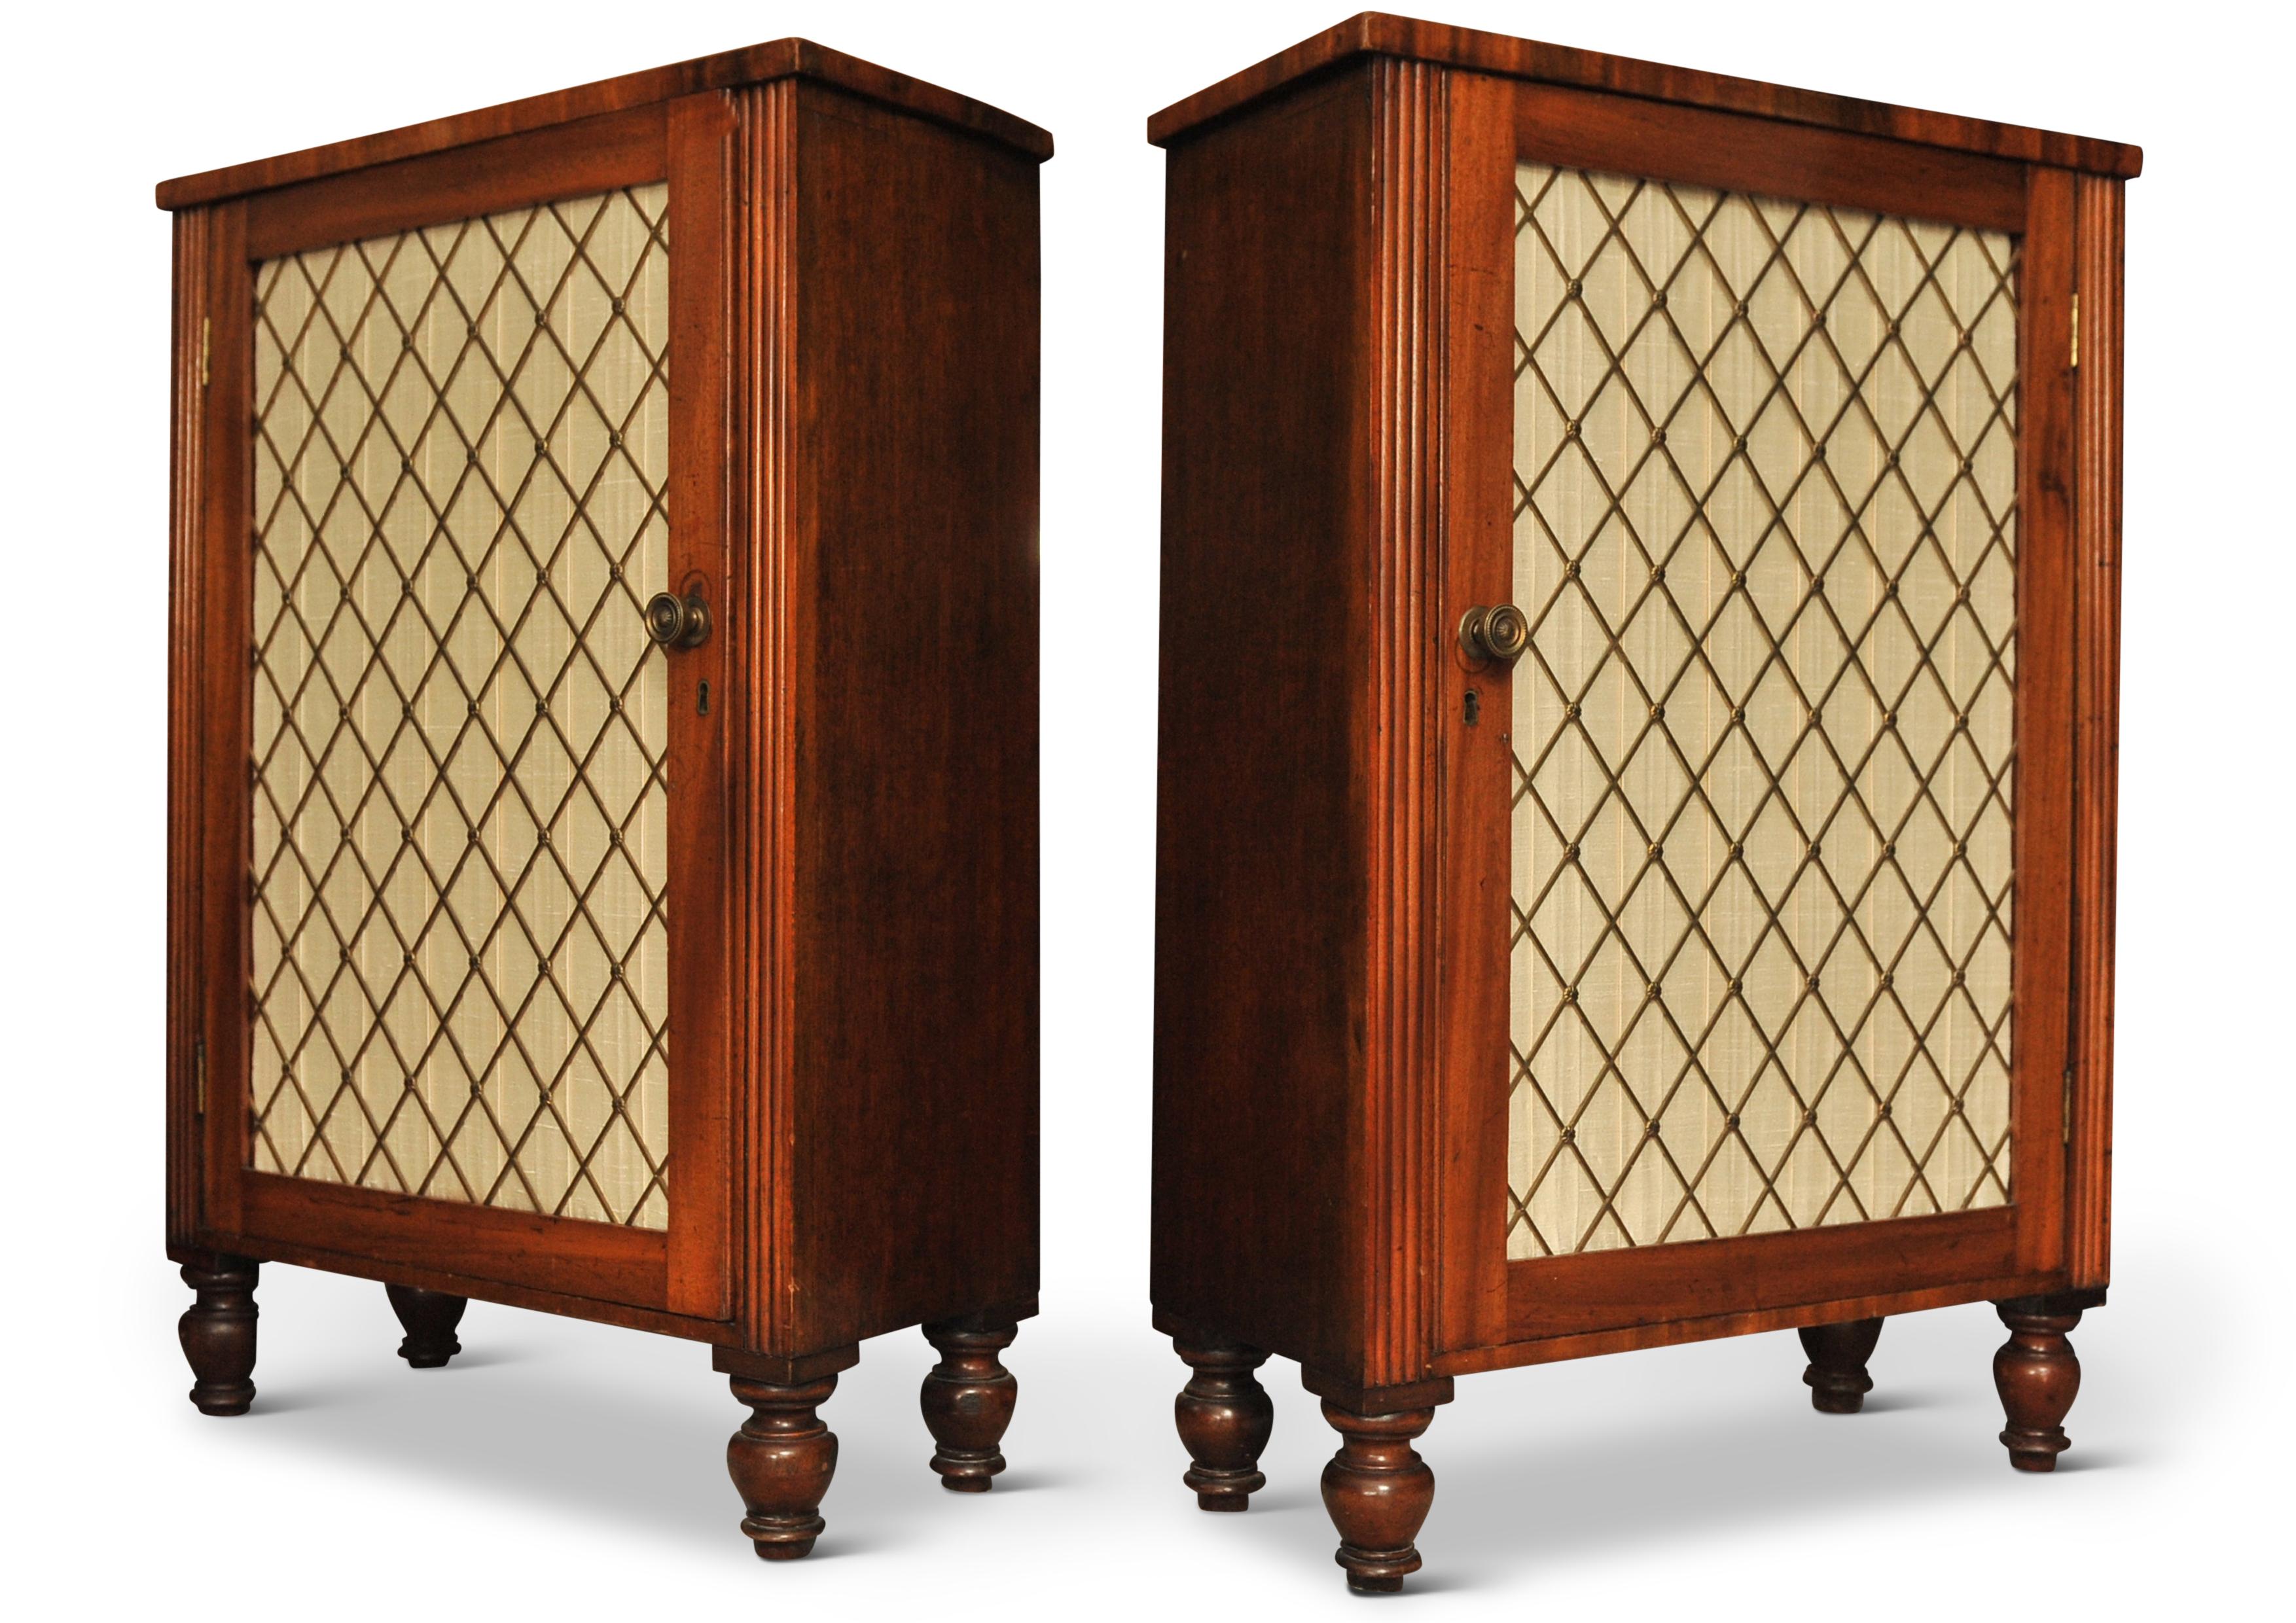 Rare Pair of Regency Period Mahogany Side Cabinets with Brass Lattice Fronts In Good Condition For Sale In High Wycombe, GB